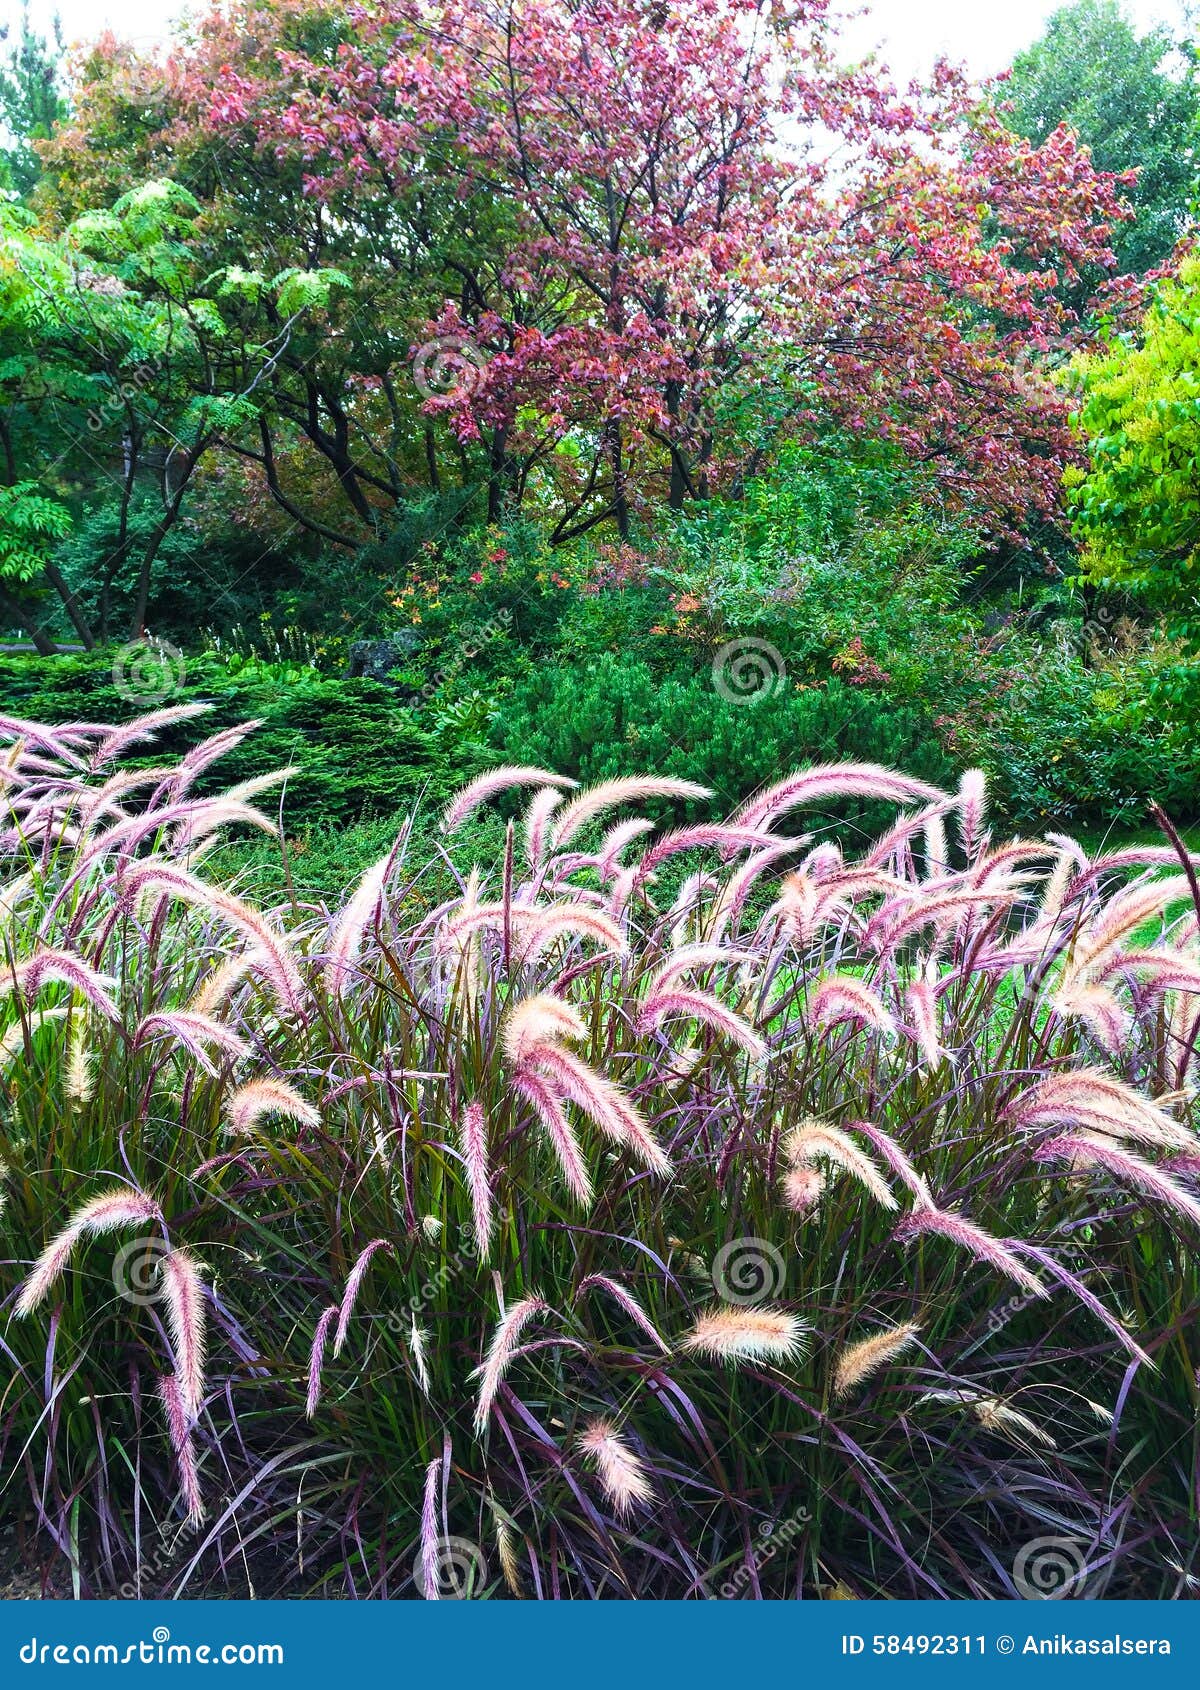 colorful garden with ornamental grass